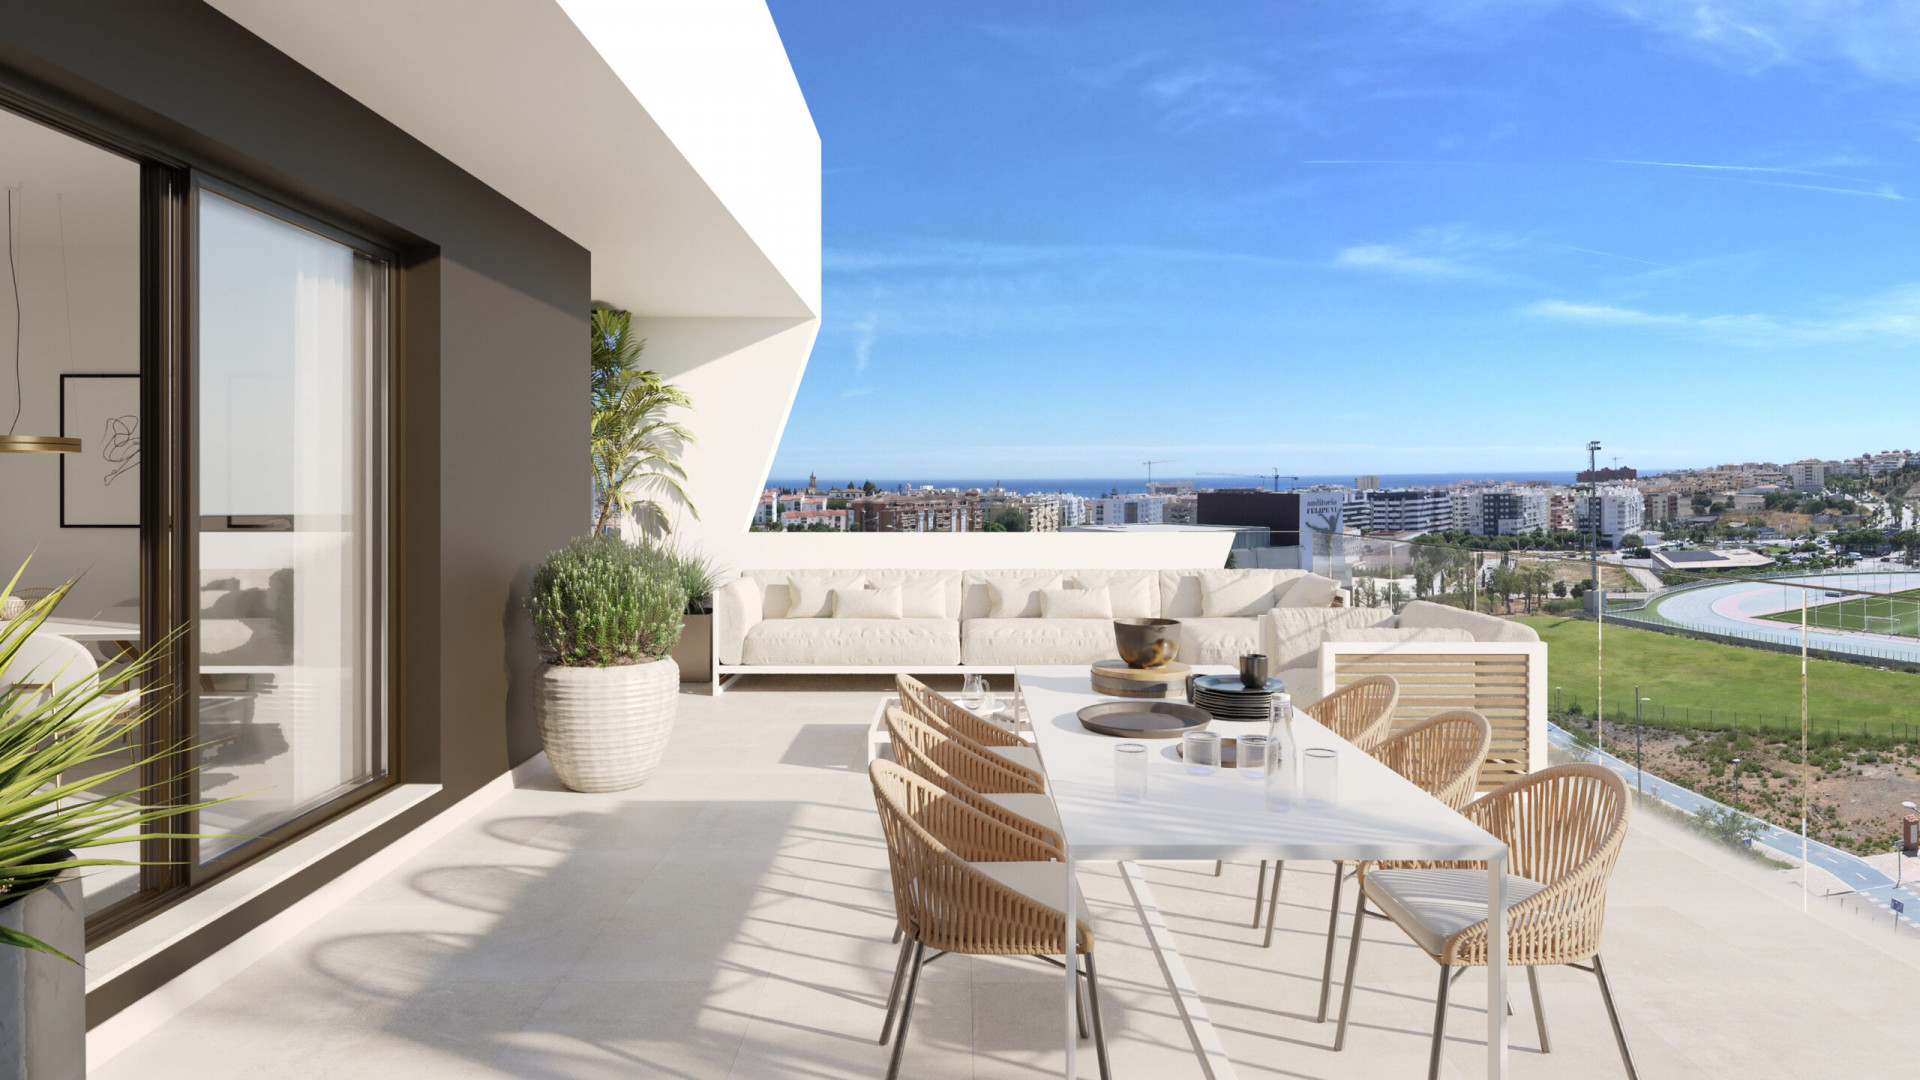 Atica Homes: Contemporary flats with views in a privileged setting in Estepona. | Image 7